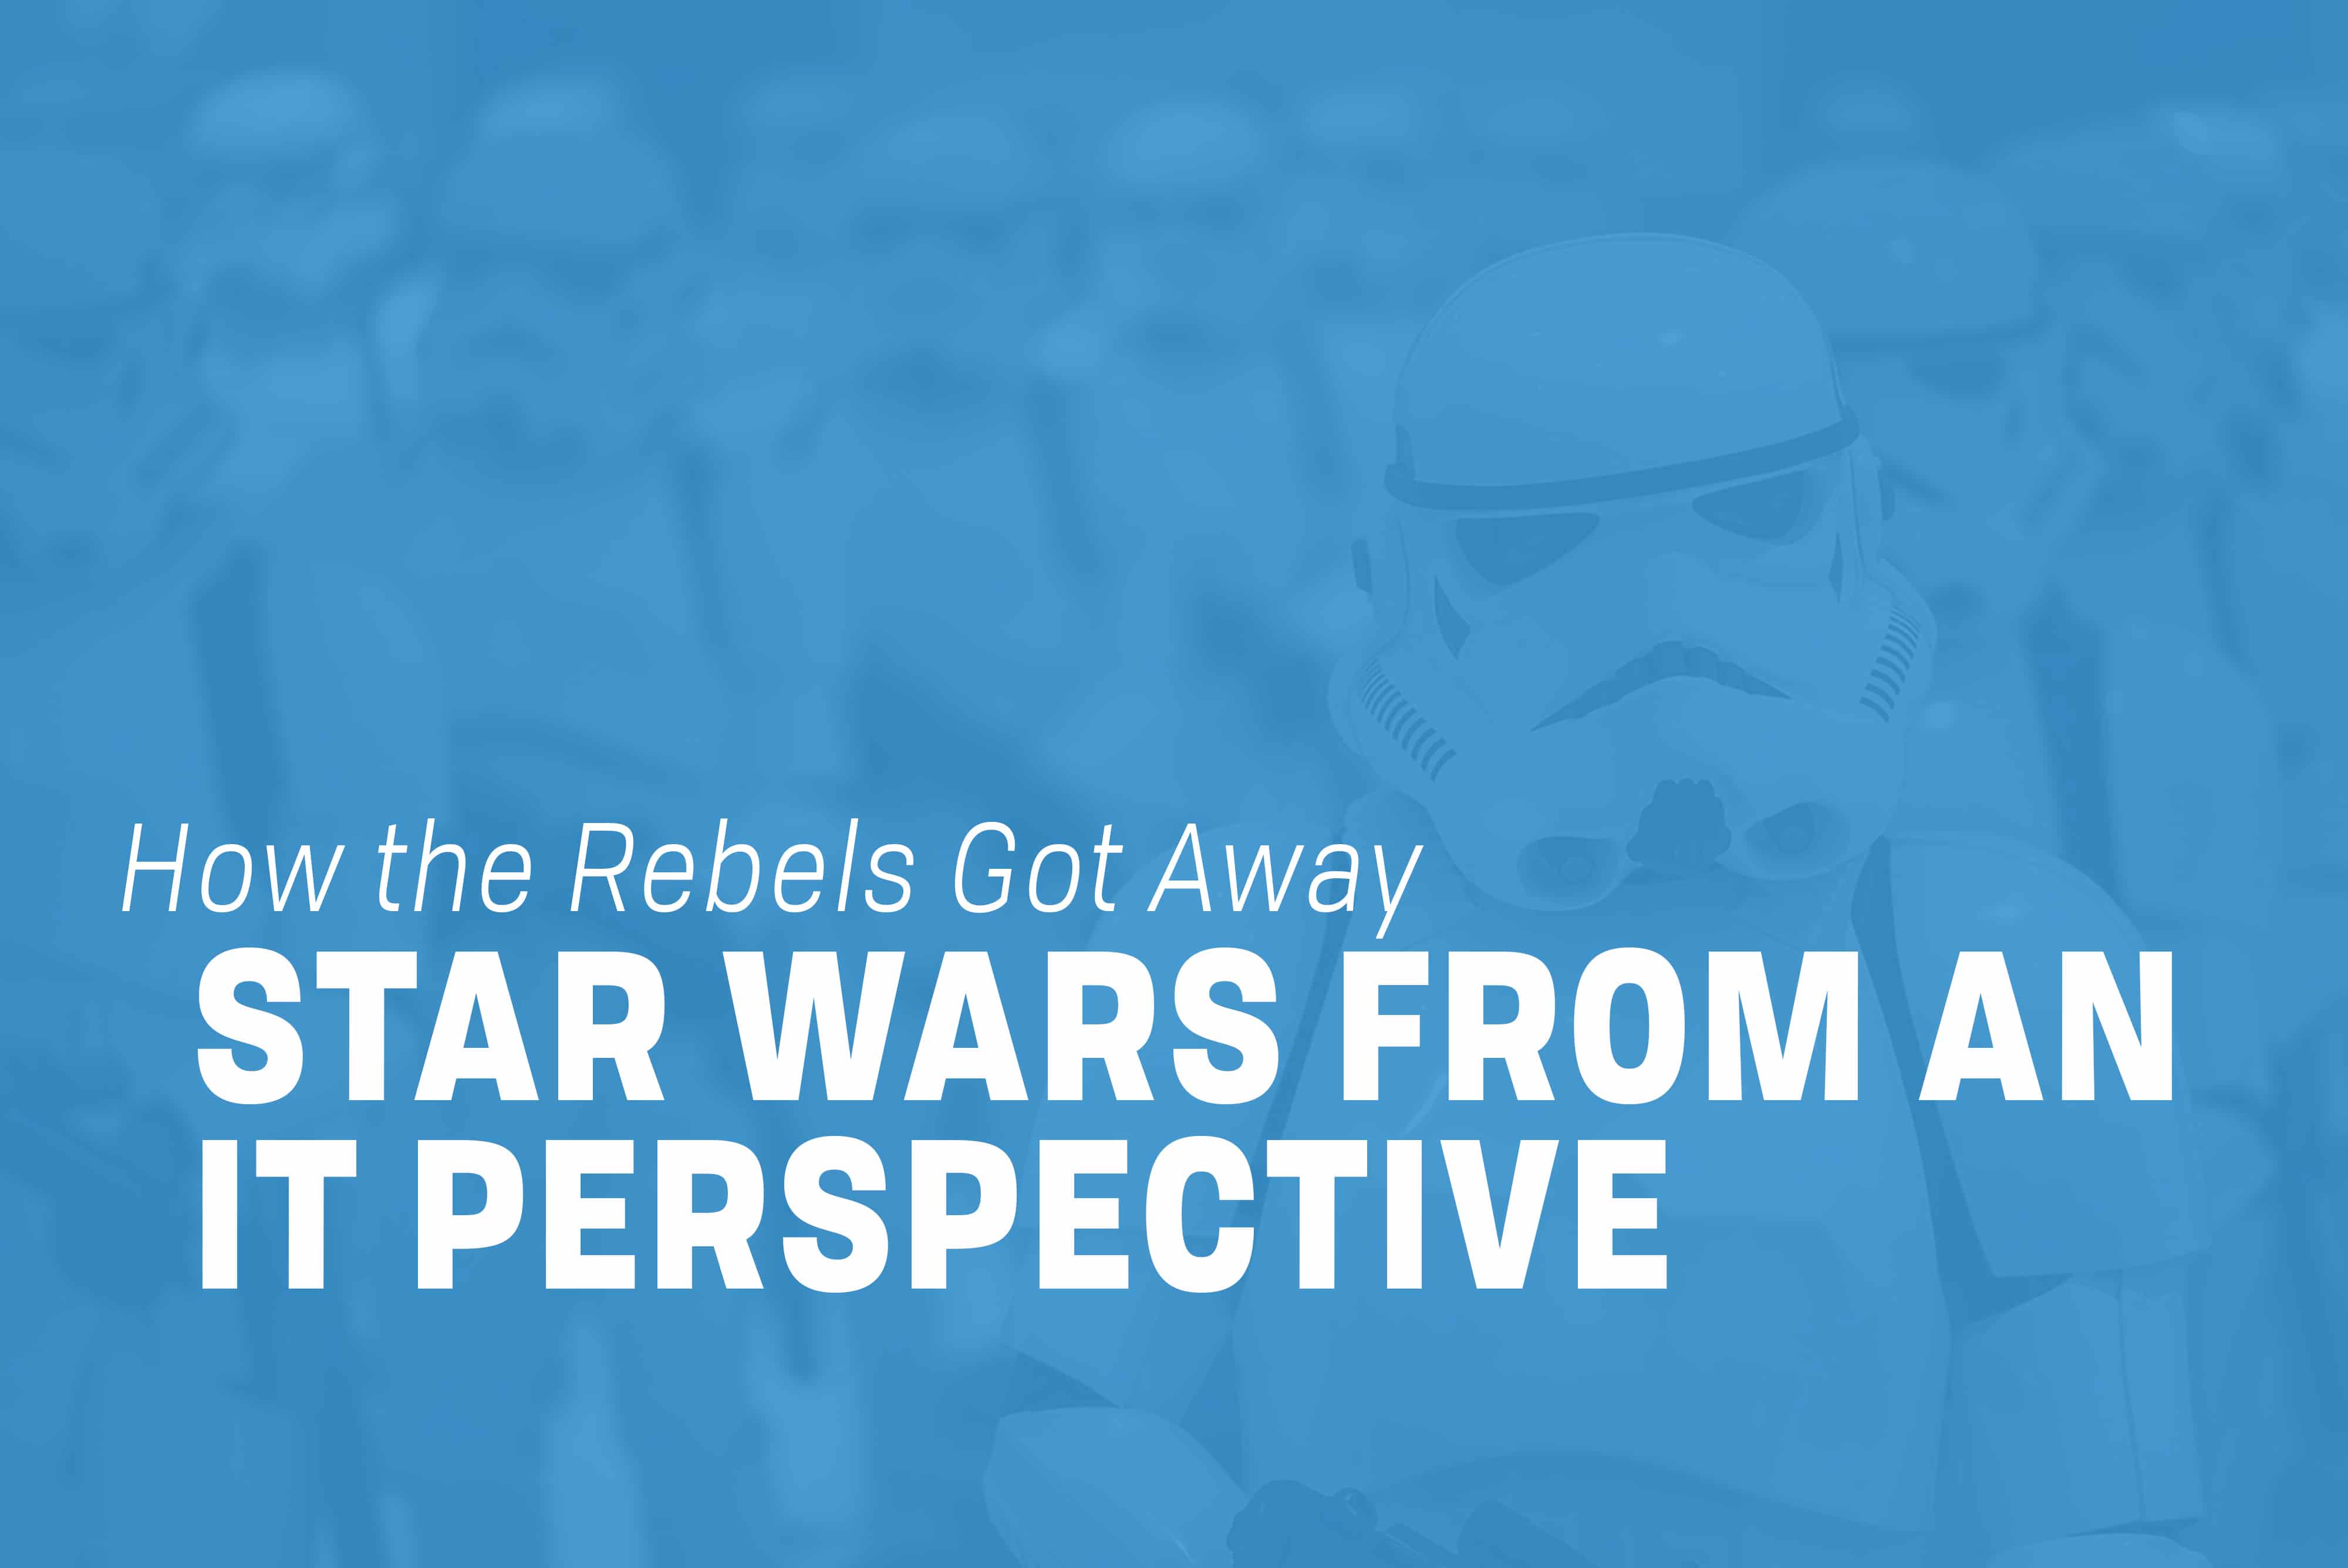 You are currently viewing How the Rebels Got Away: A Star Wars IT Perspective